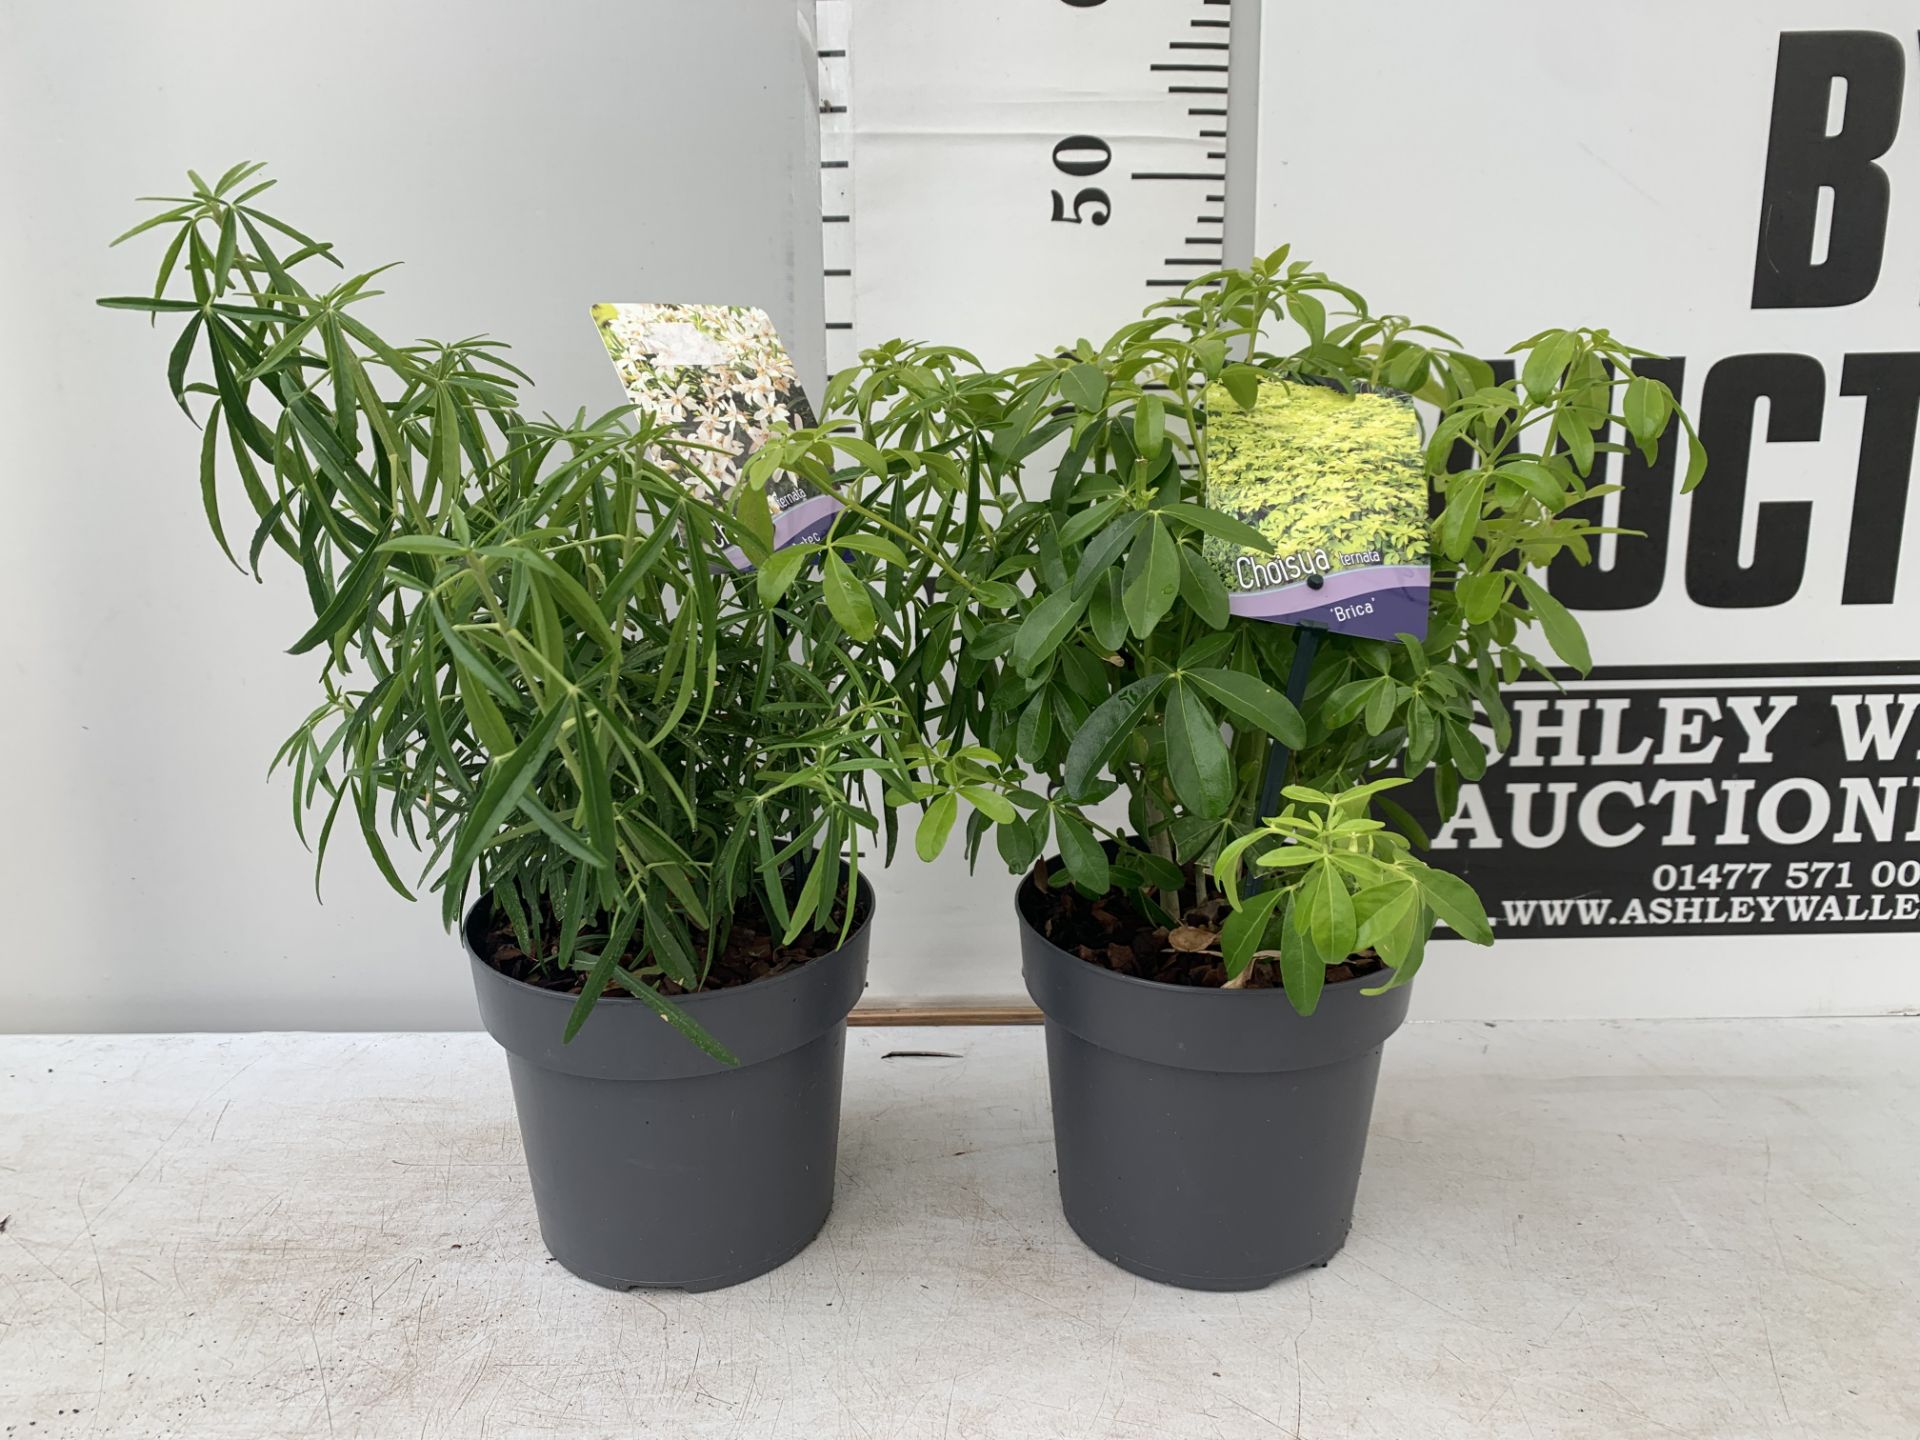 TWO CHOSIYA TERNATA 'BRICA' AND 'AZTEC PEARL' APPROX 45CM IN HEIGHT IN 2 LTR POTS PLUS VAT TO BE